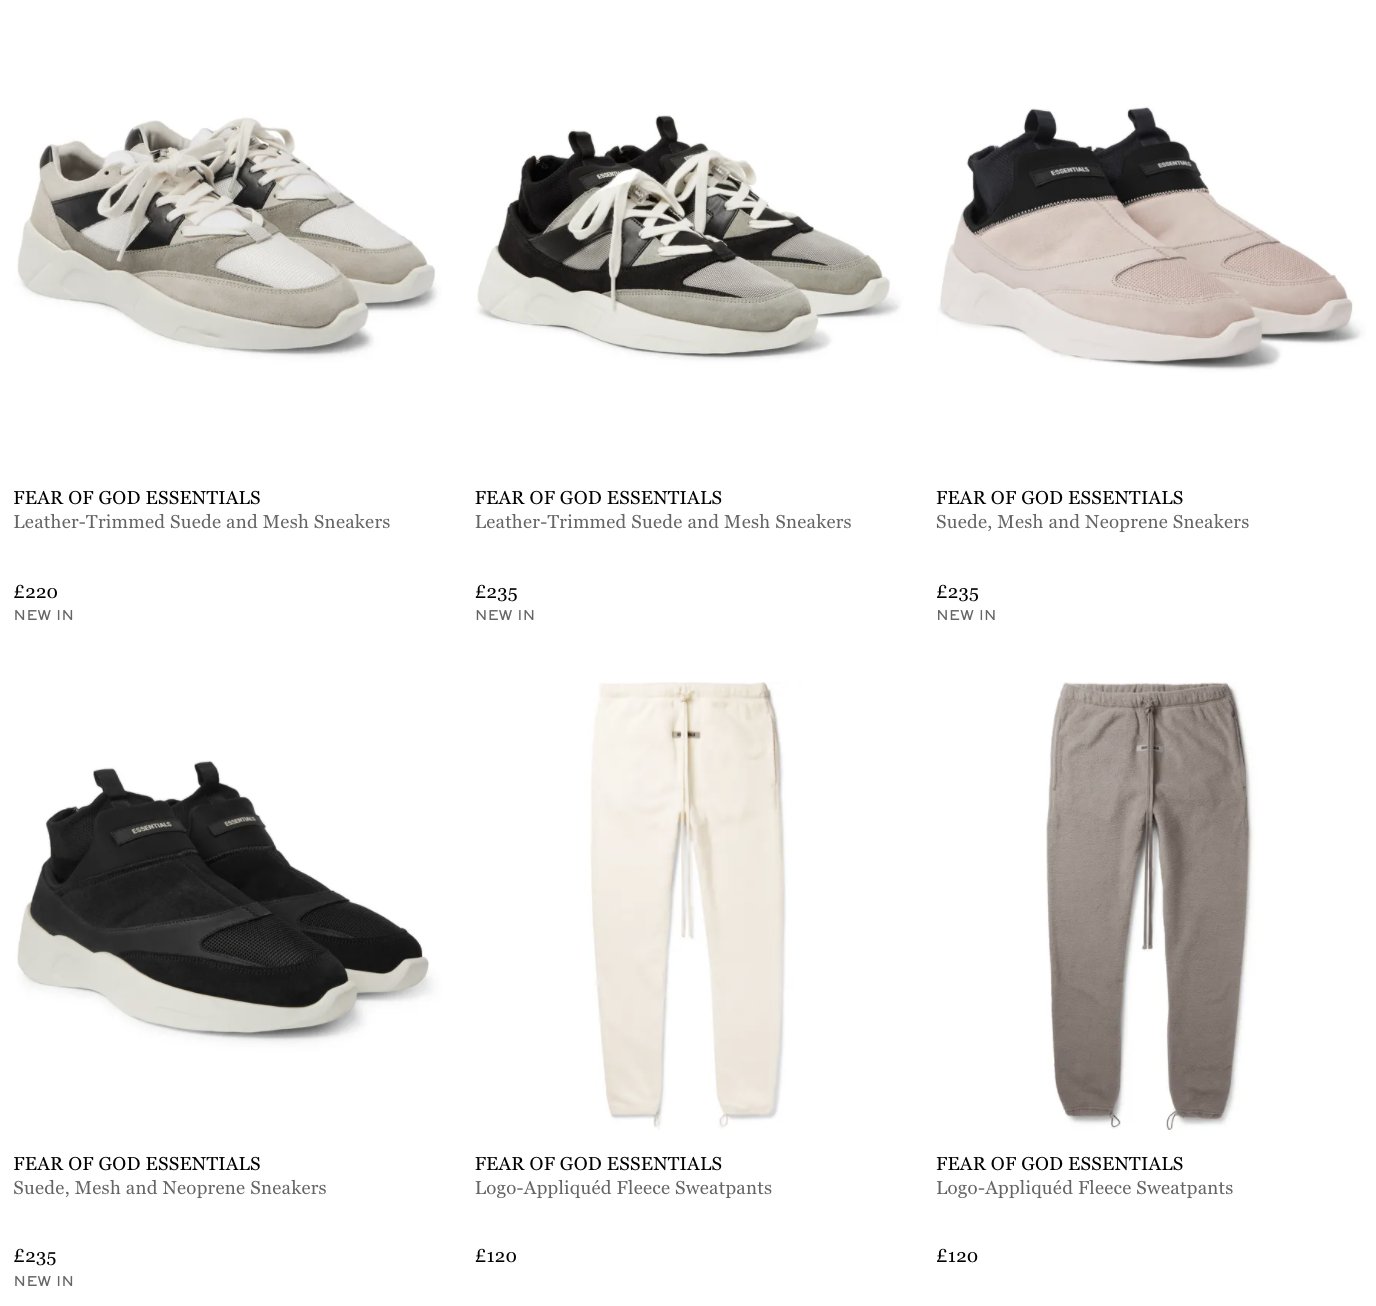 design fugtighed coping Sneaker Myth on Twitter: "ad: The Fear Of God Essentials Apparel Collection  Is Back In Stock At Mr Porter UK &gt;&gt; https://t.co/bPpNACcomX FOG  Essentials Sneakers Also LIVE! https://t.co/BVuI2bB449" / Twitter